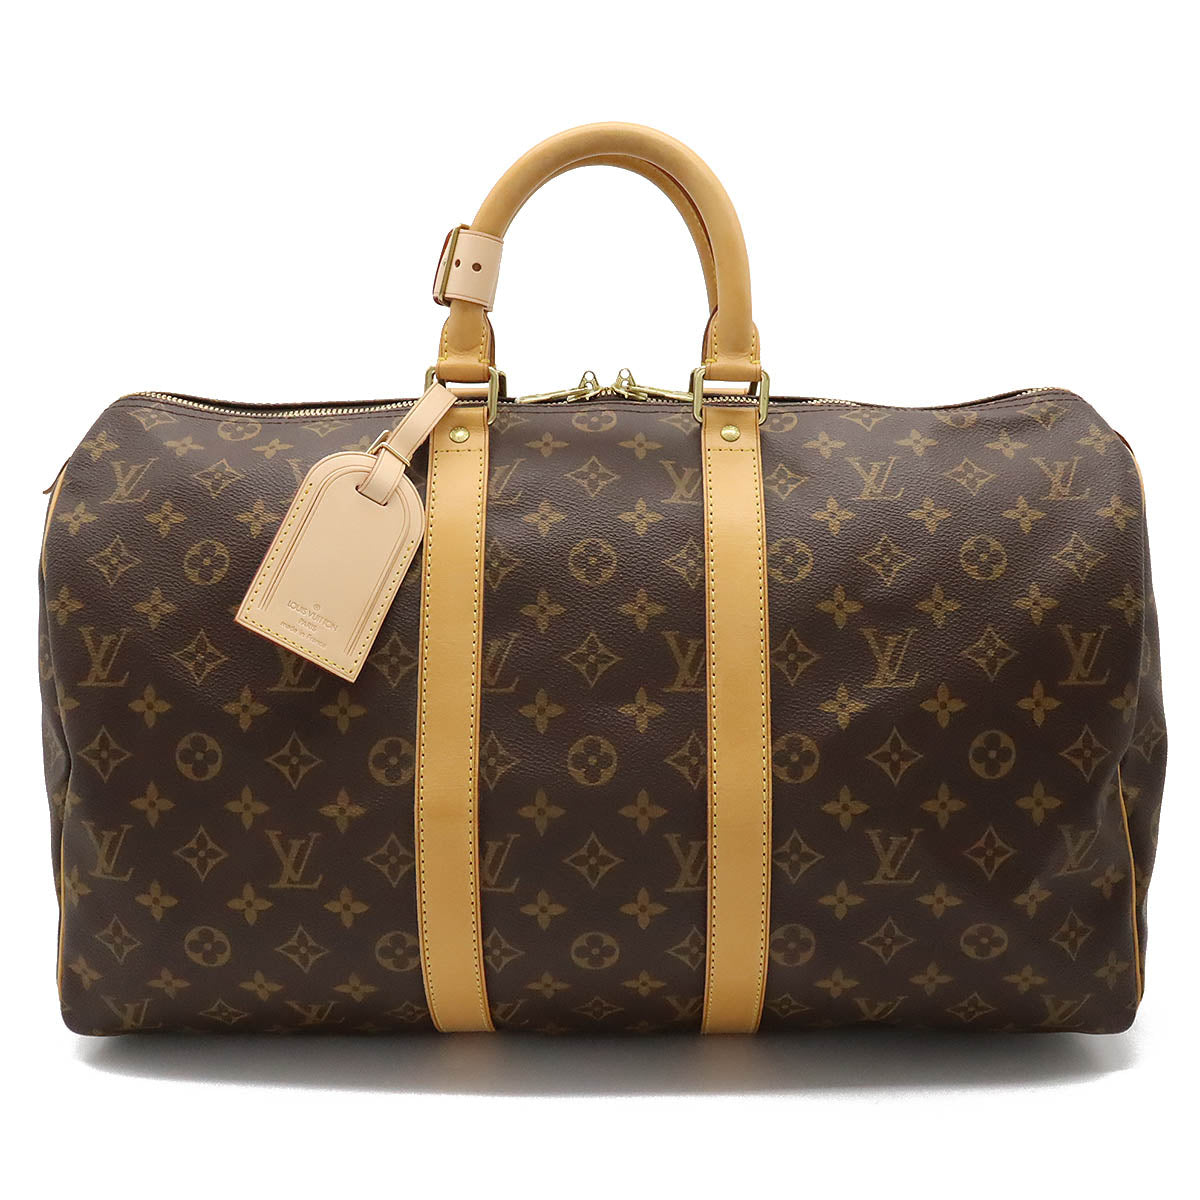 Pre-Owned Louis Vuitton Keepall Bandouliere Monogram 50 Travel Bag